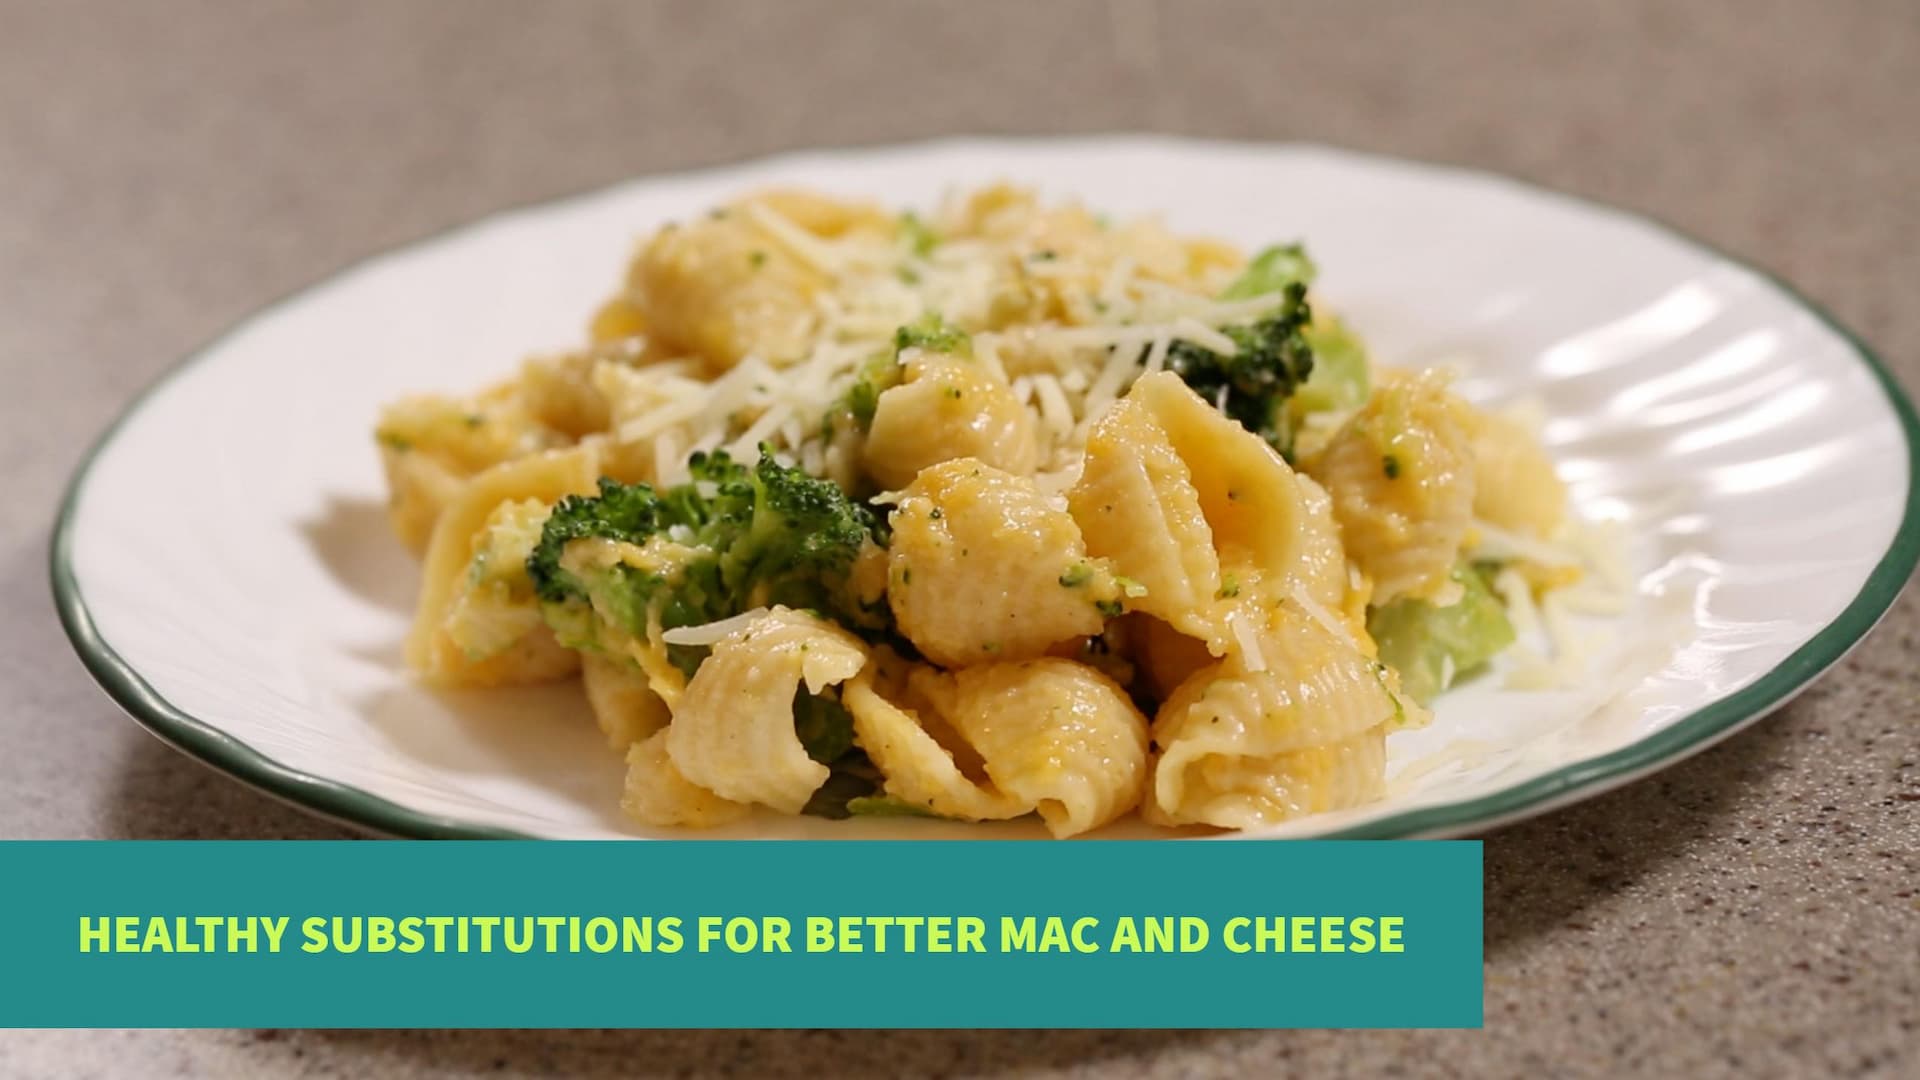 Make Better Macaroni and Cheese with Healthy Substitutions. Get the Full Recipe | Intermountain Healthcare Blogs